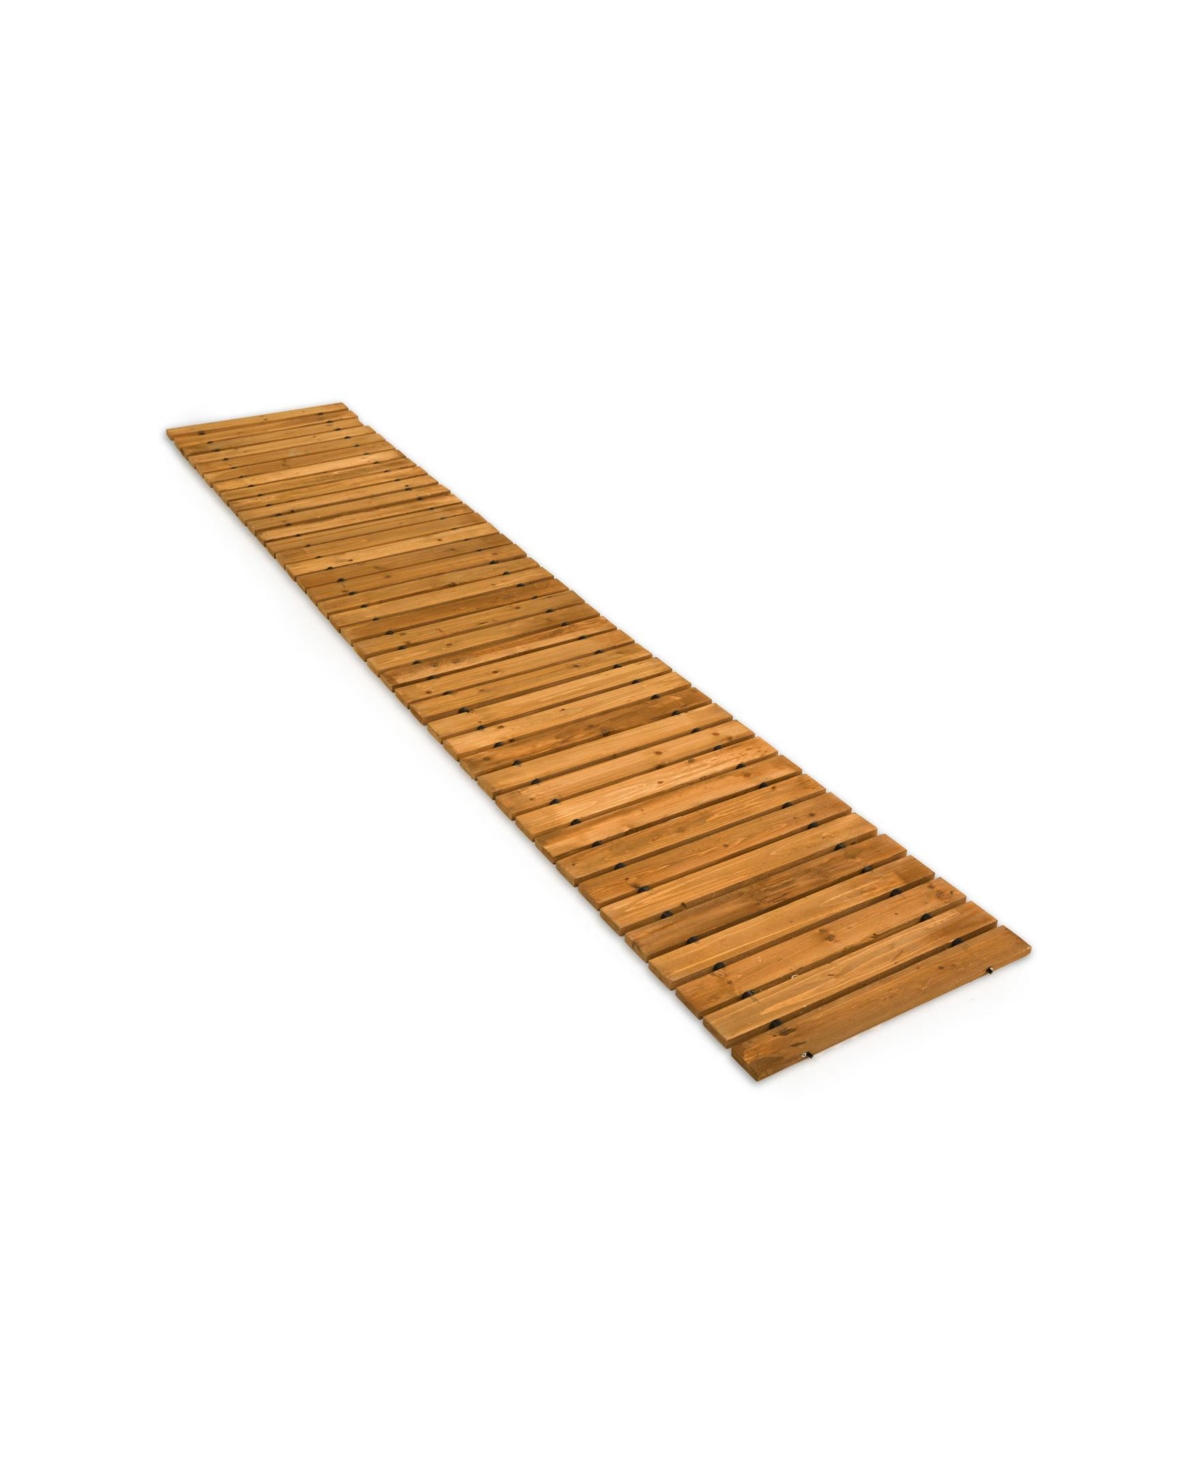 6' Portable Wooden Pathway for Gardens - Brown